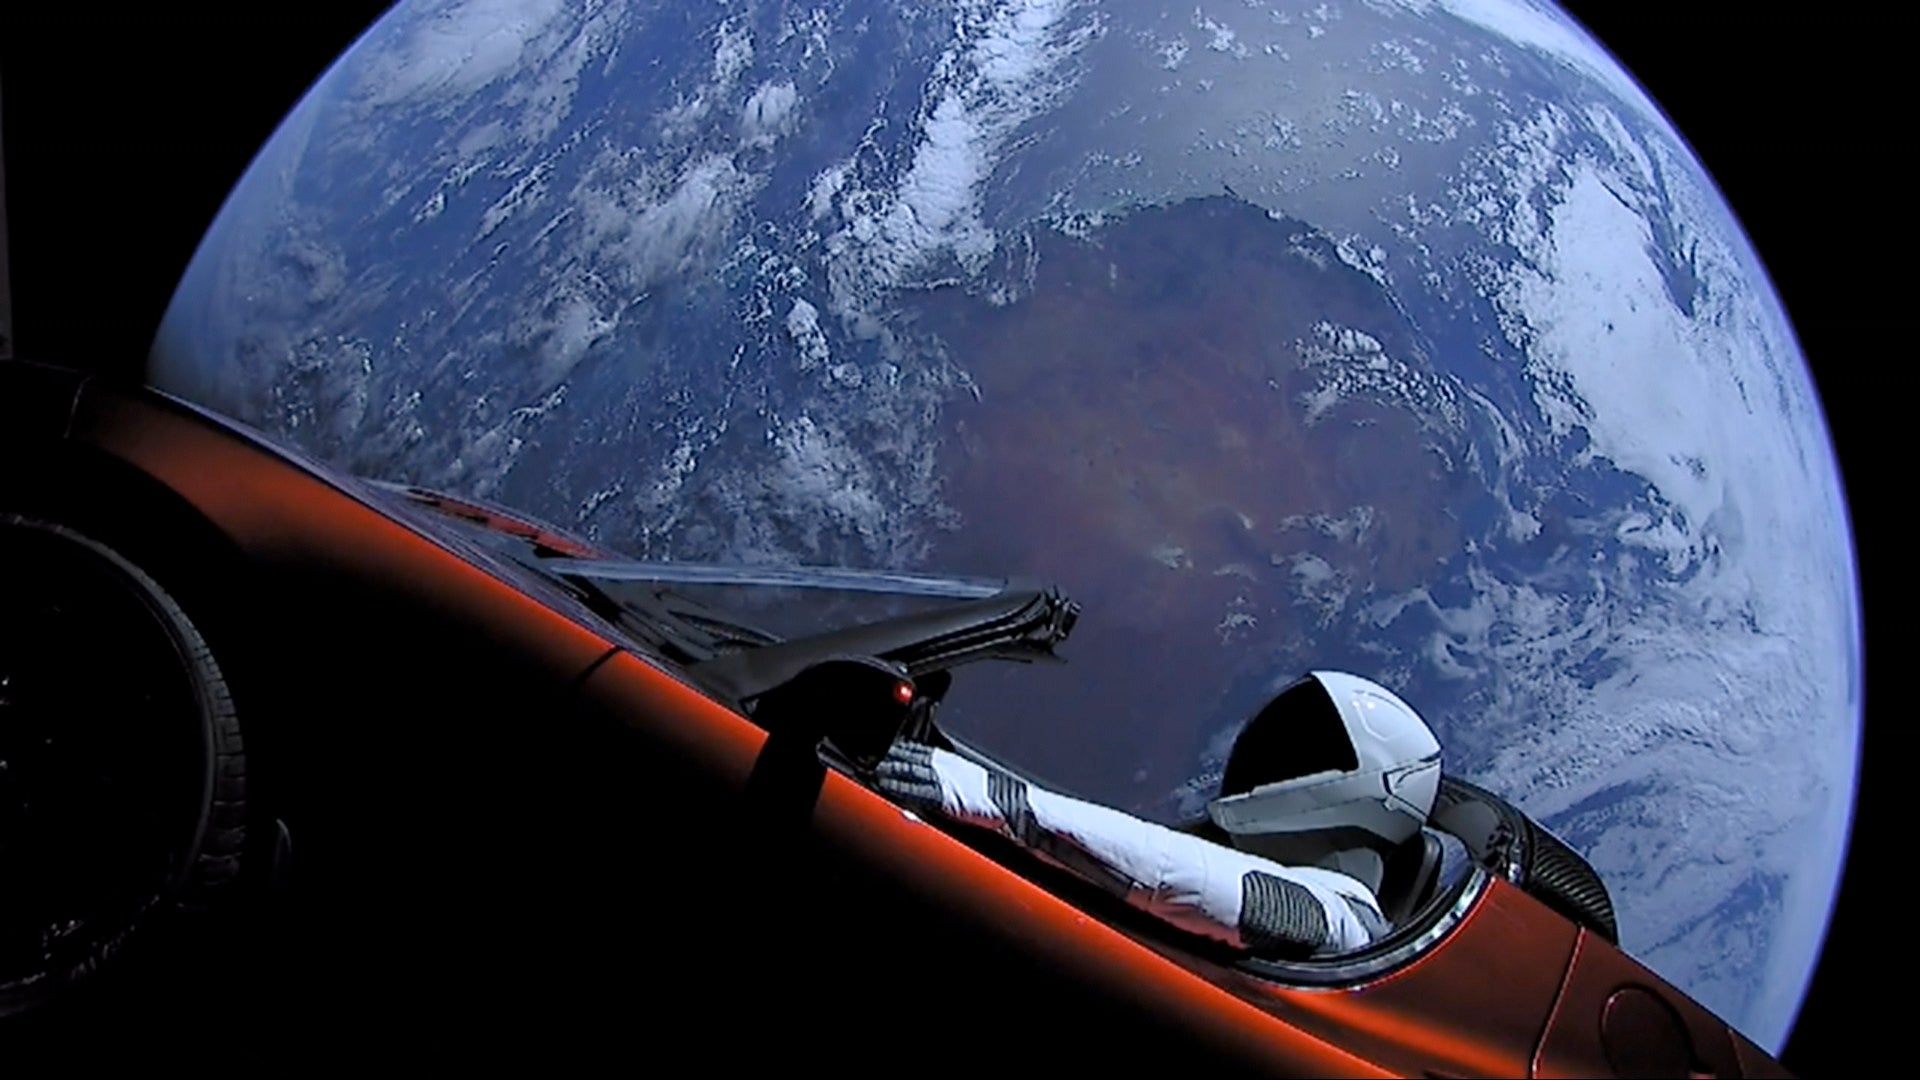 Starman has been cruising space for 3 years! –Today is the third anniversary of SpaceX’s Falcon Heavy debut flight